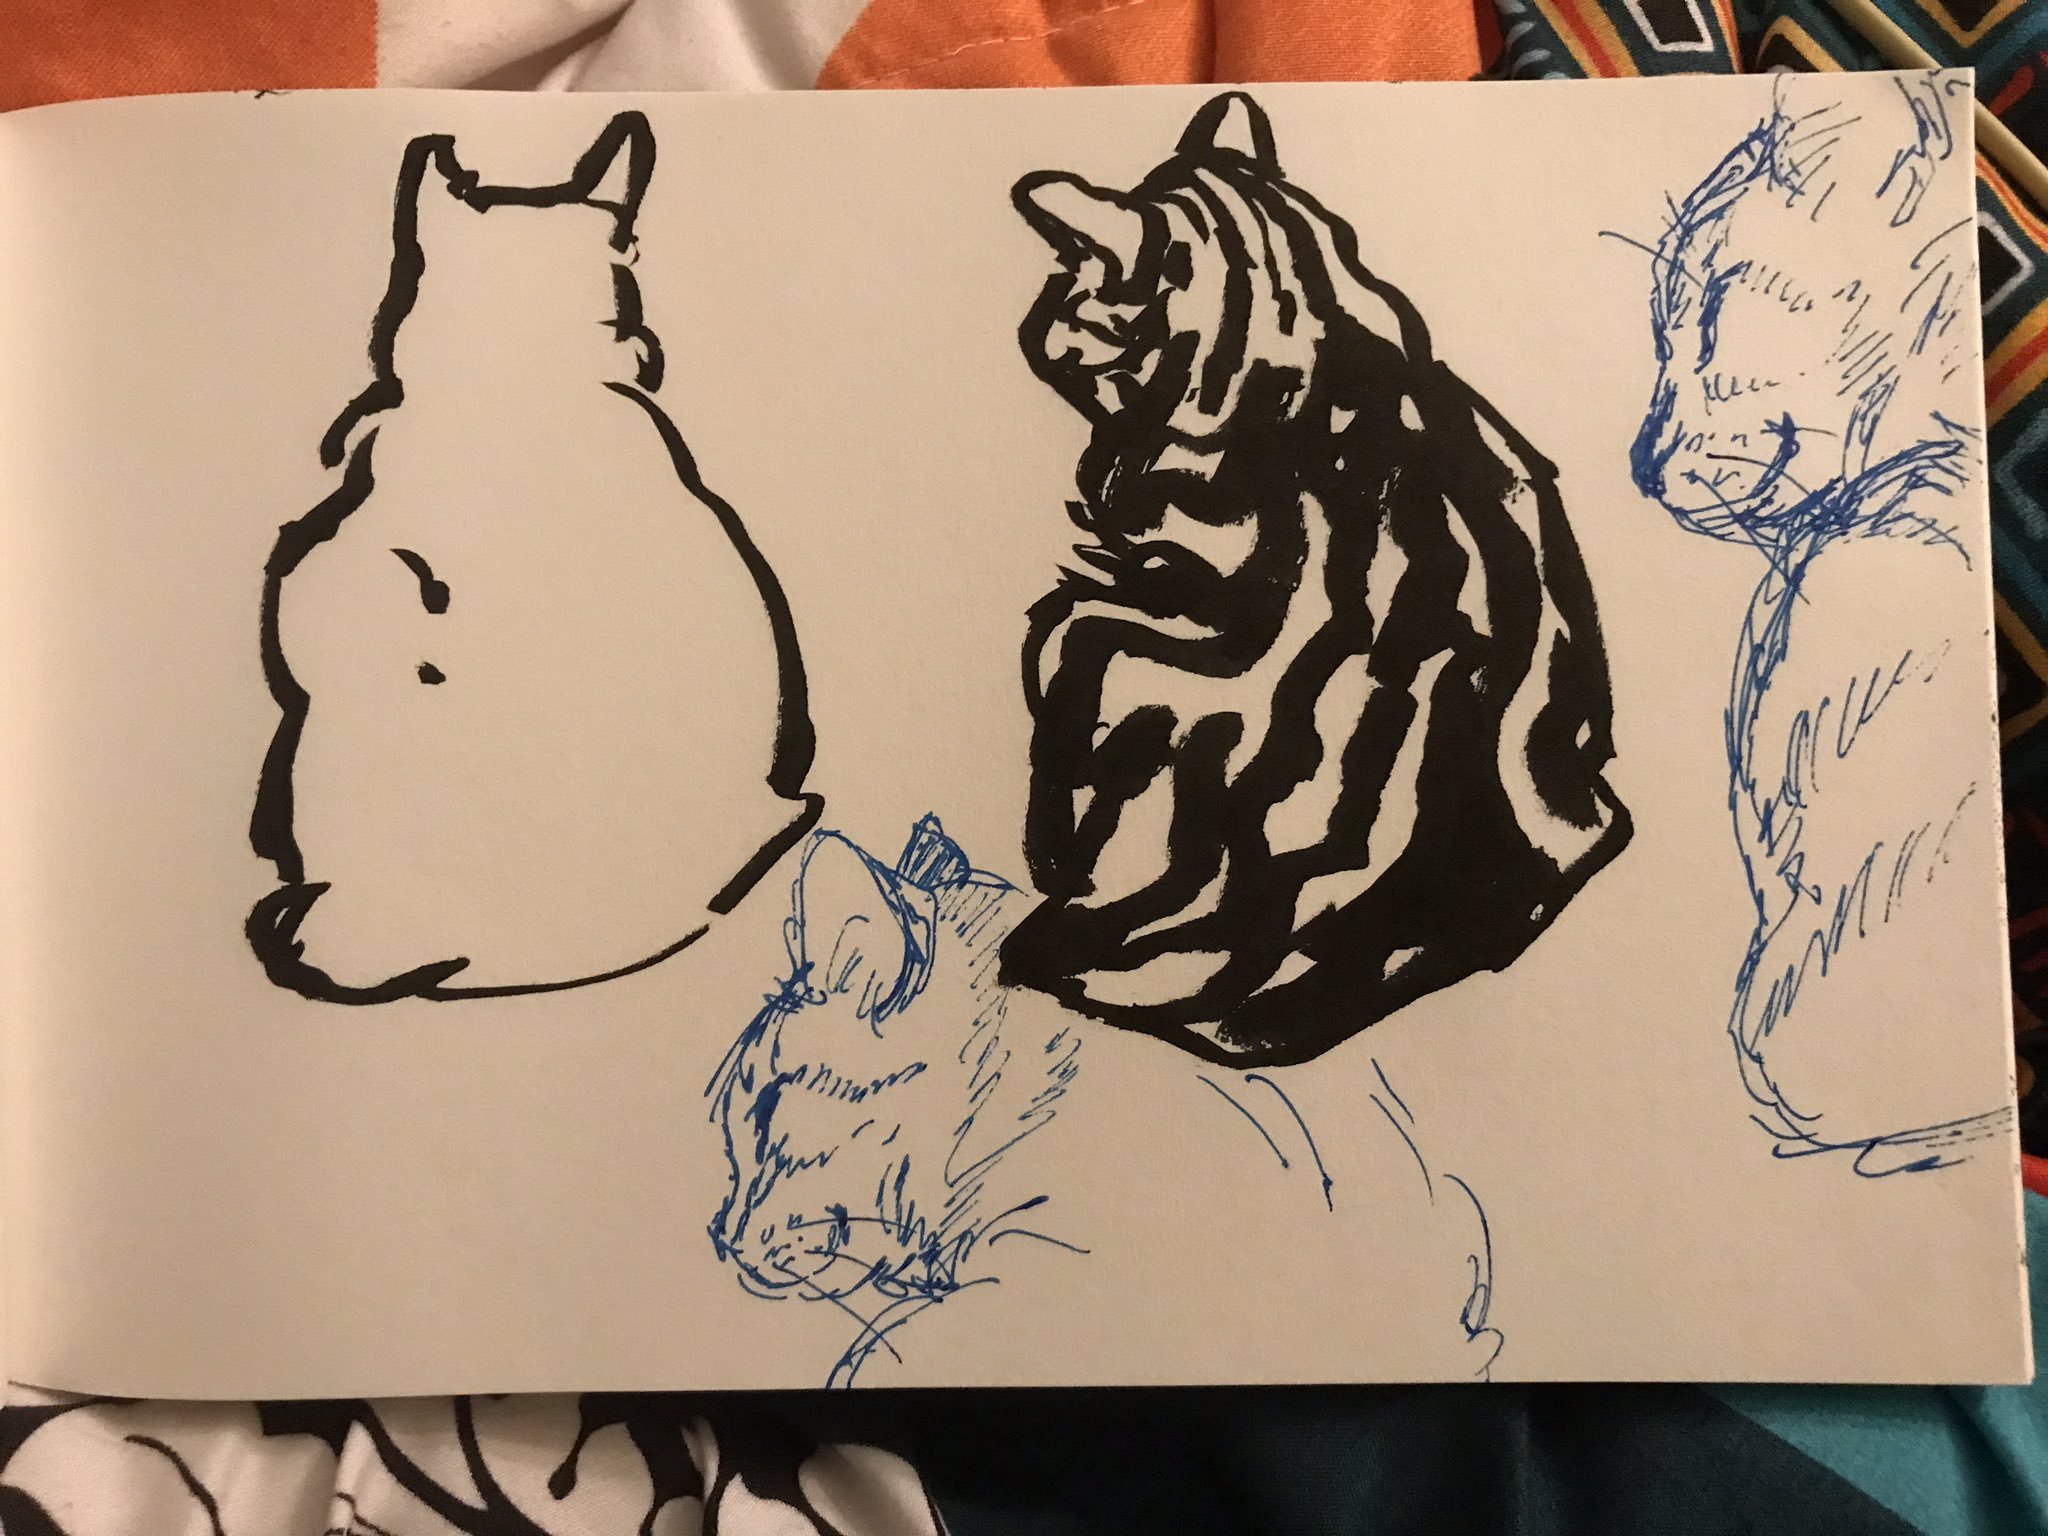 Photo of a sketchbook page with two drawings of my cat Sailor napping on it